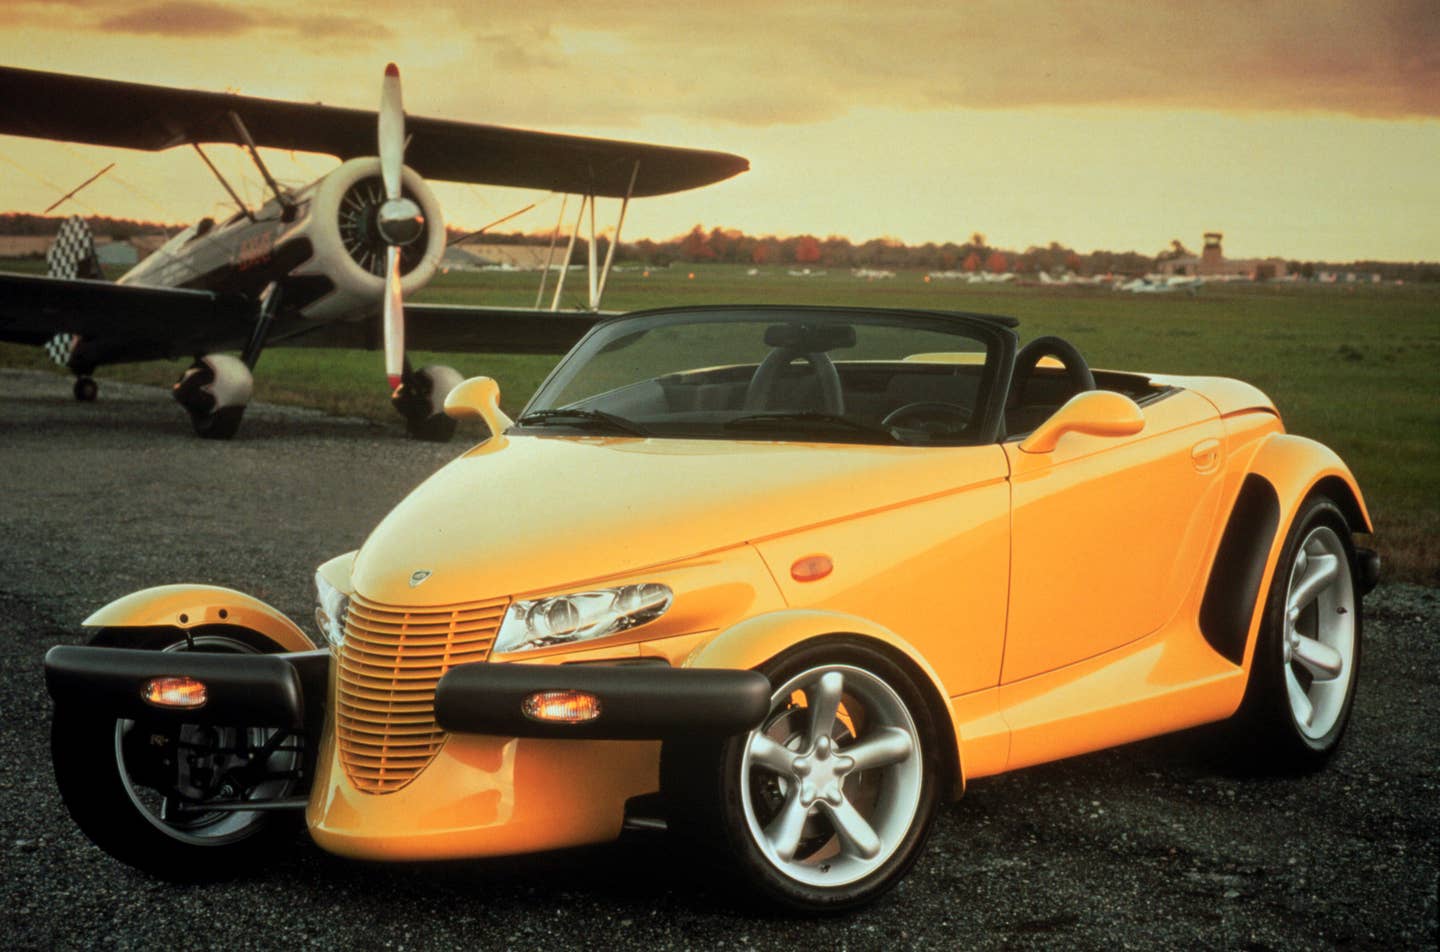 1999 Plymouth Prowler. PP-901.